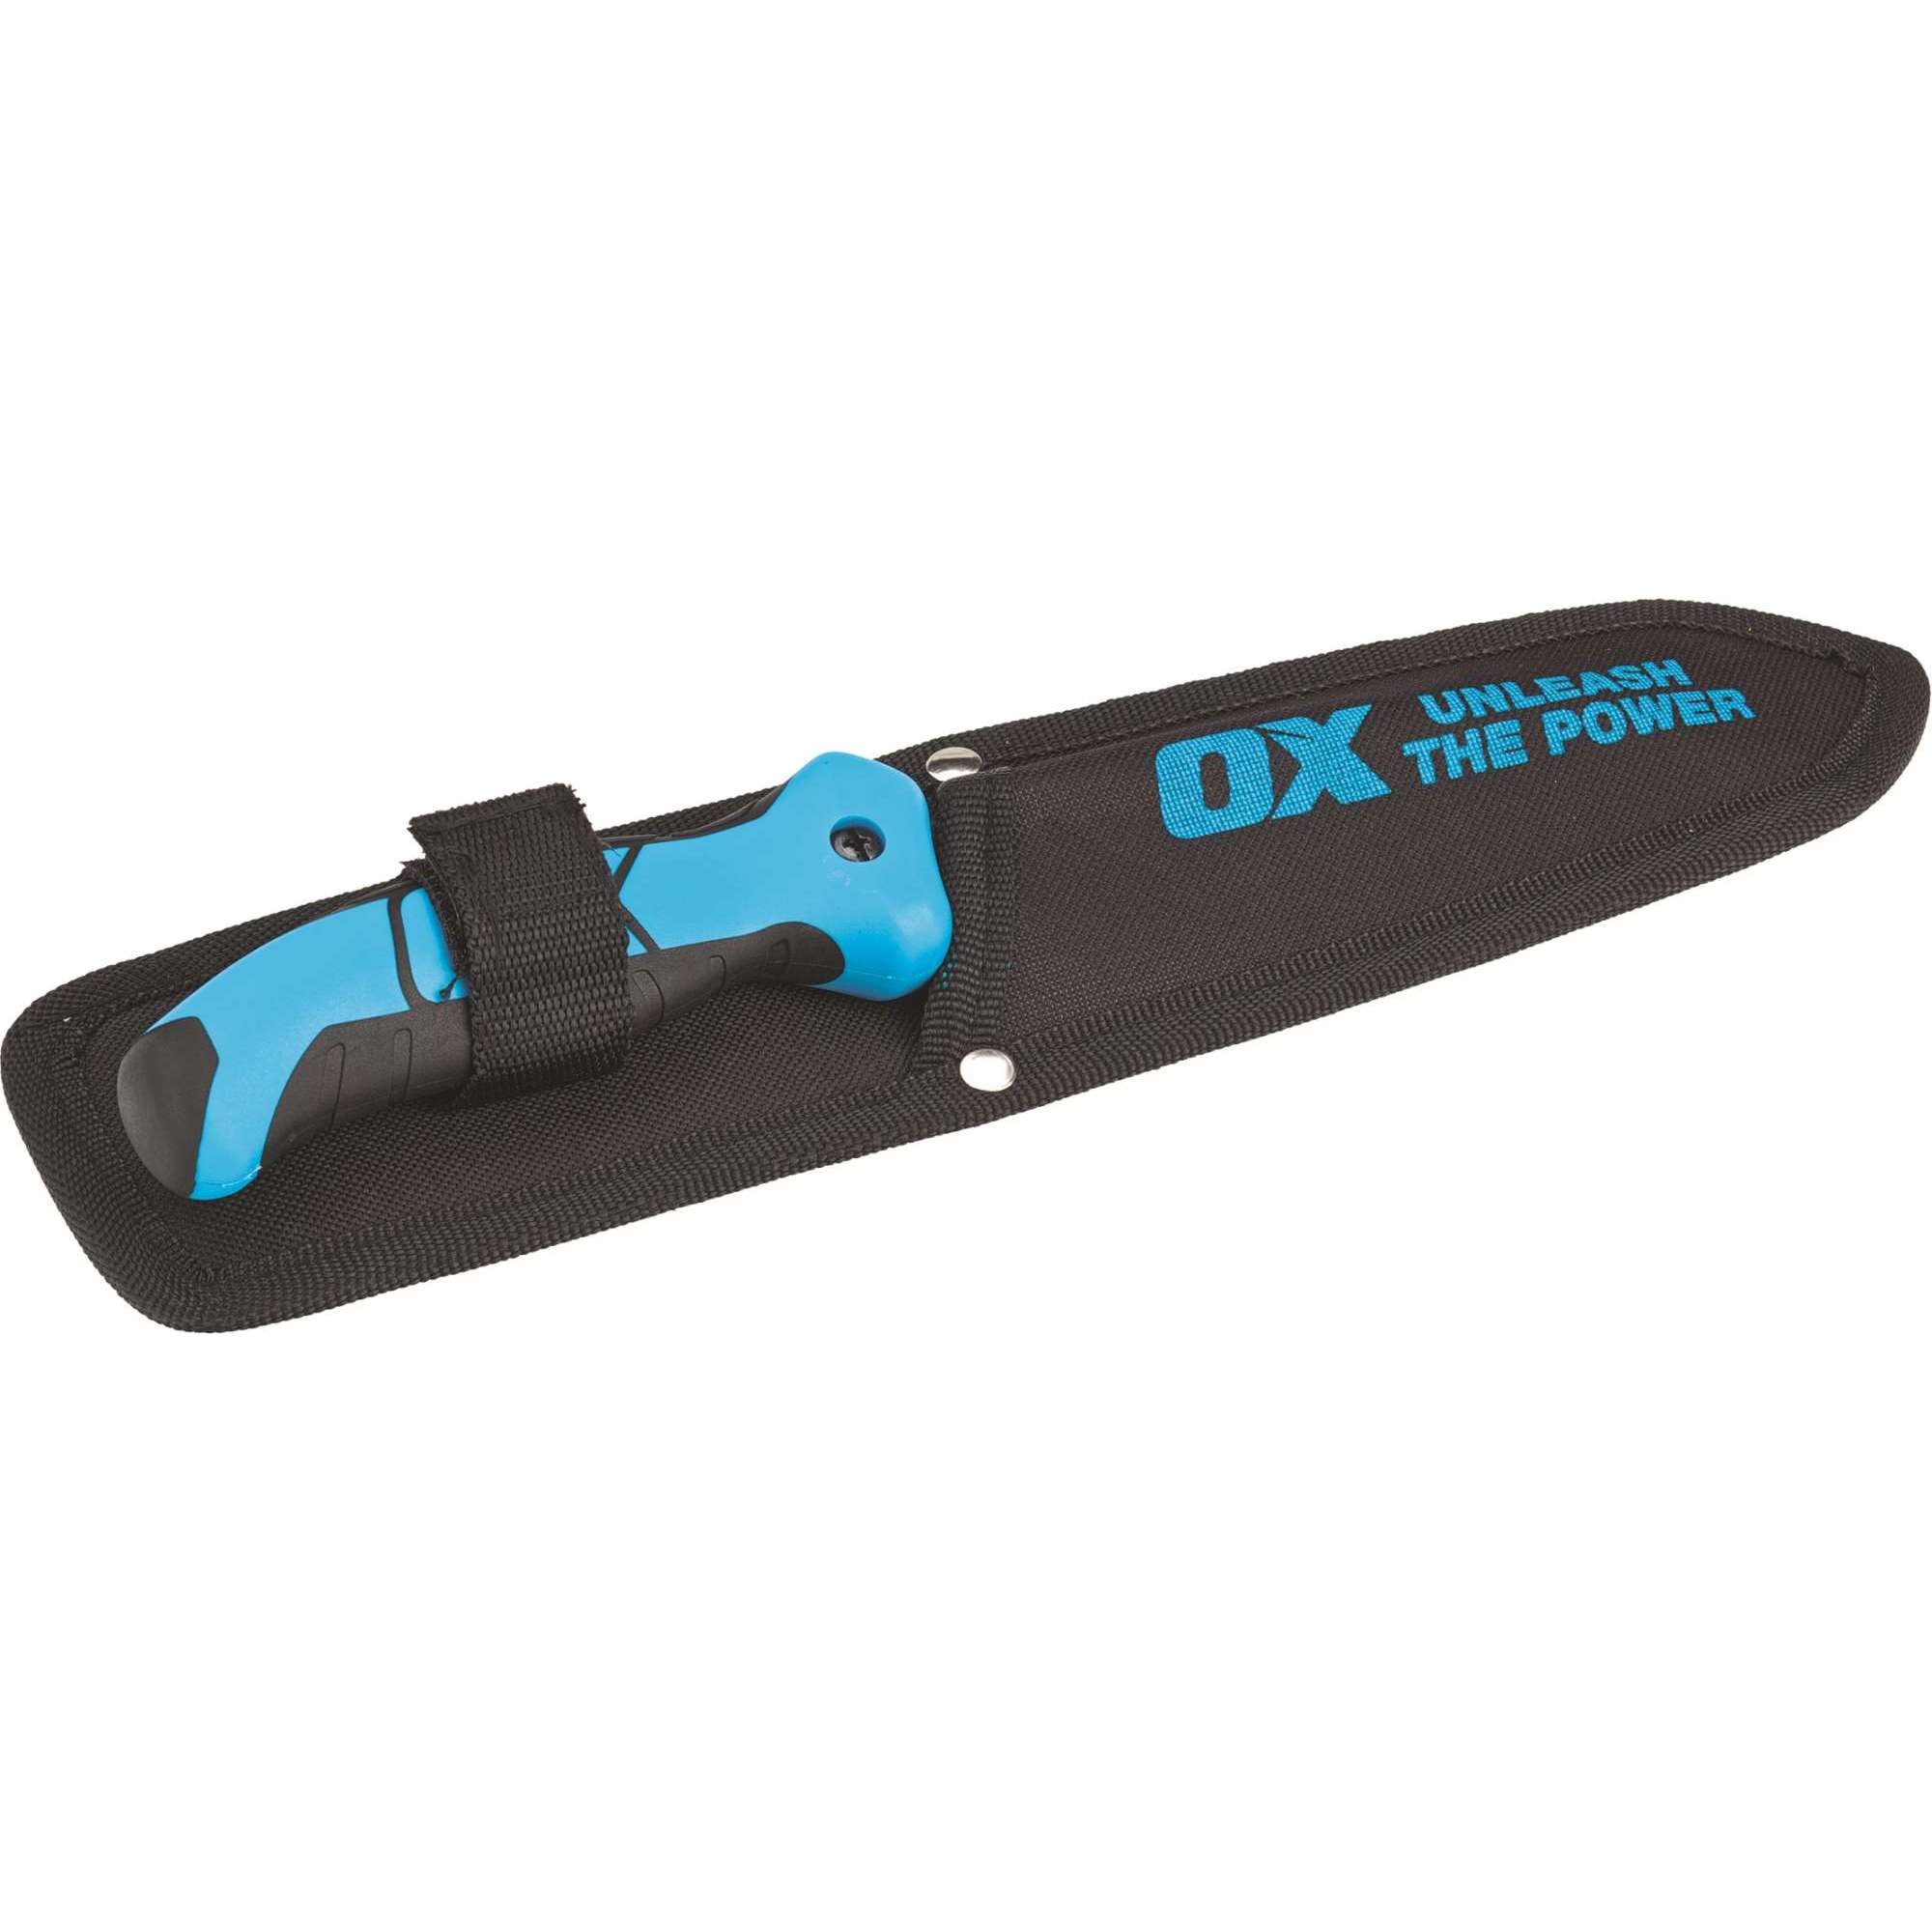 Ox Pro Jab Saw 165mm - 8 TPI With Holster